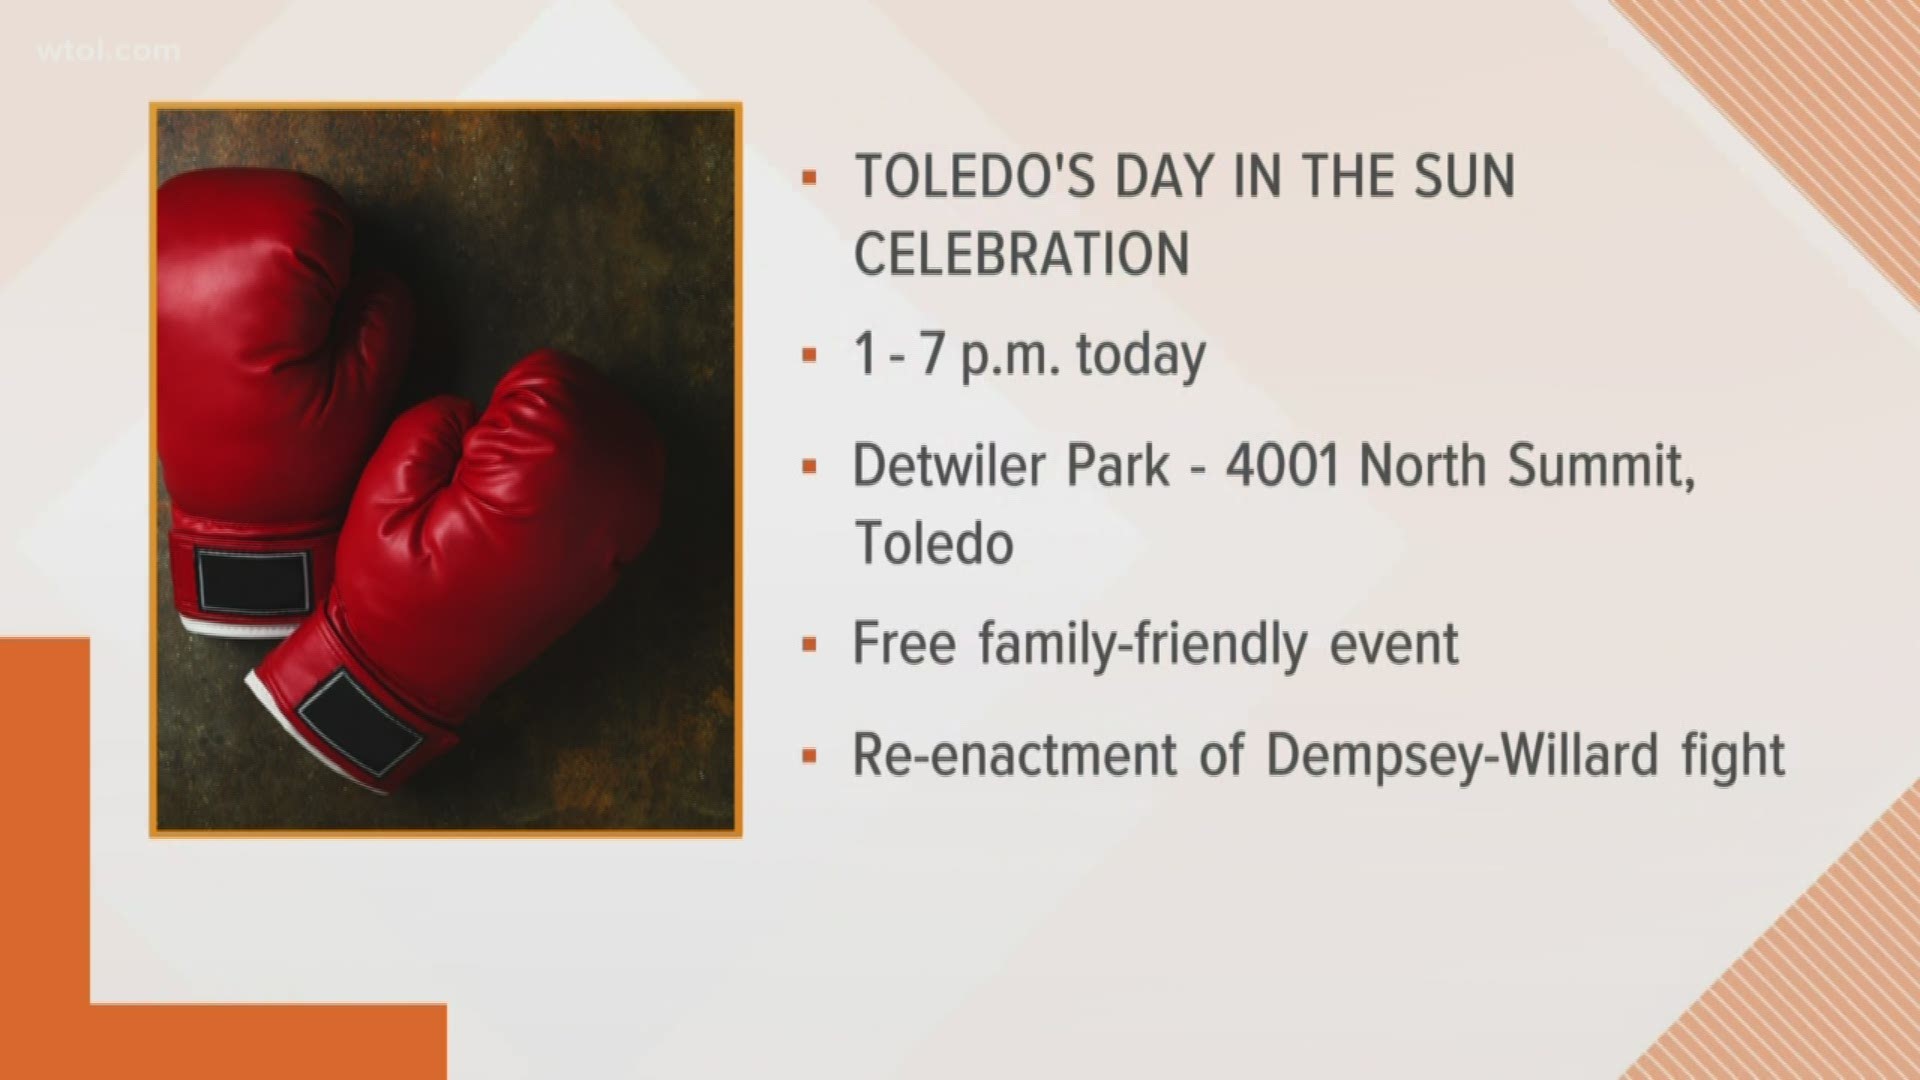 Detwiler Park in Point Place is hosting the re-creation of Dempsey-Willard fight that happened 100 years ago today.